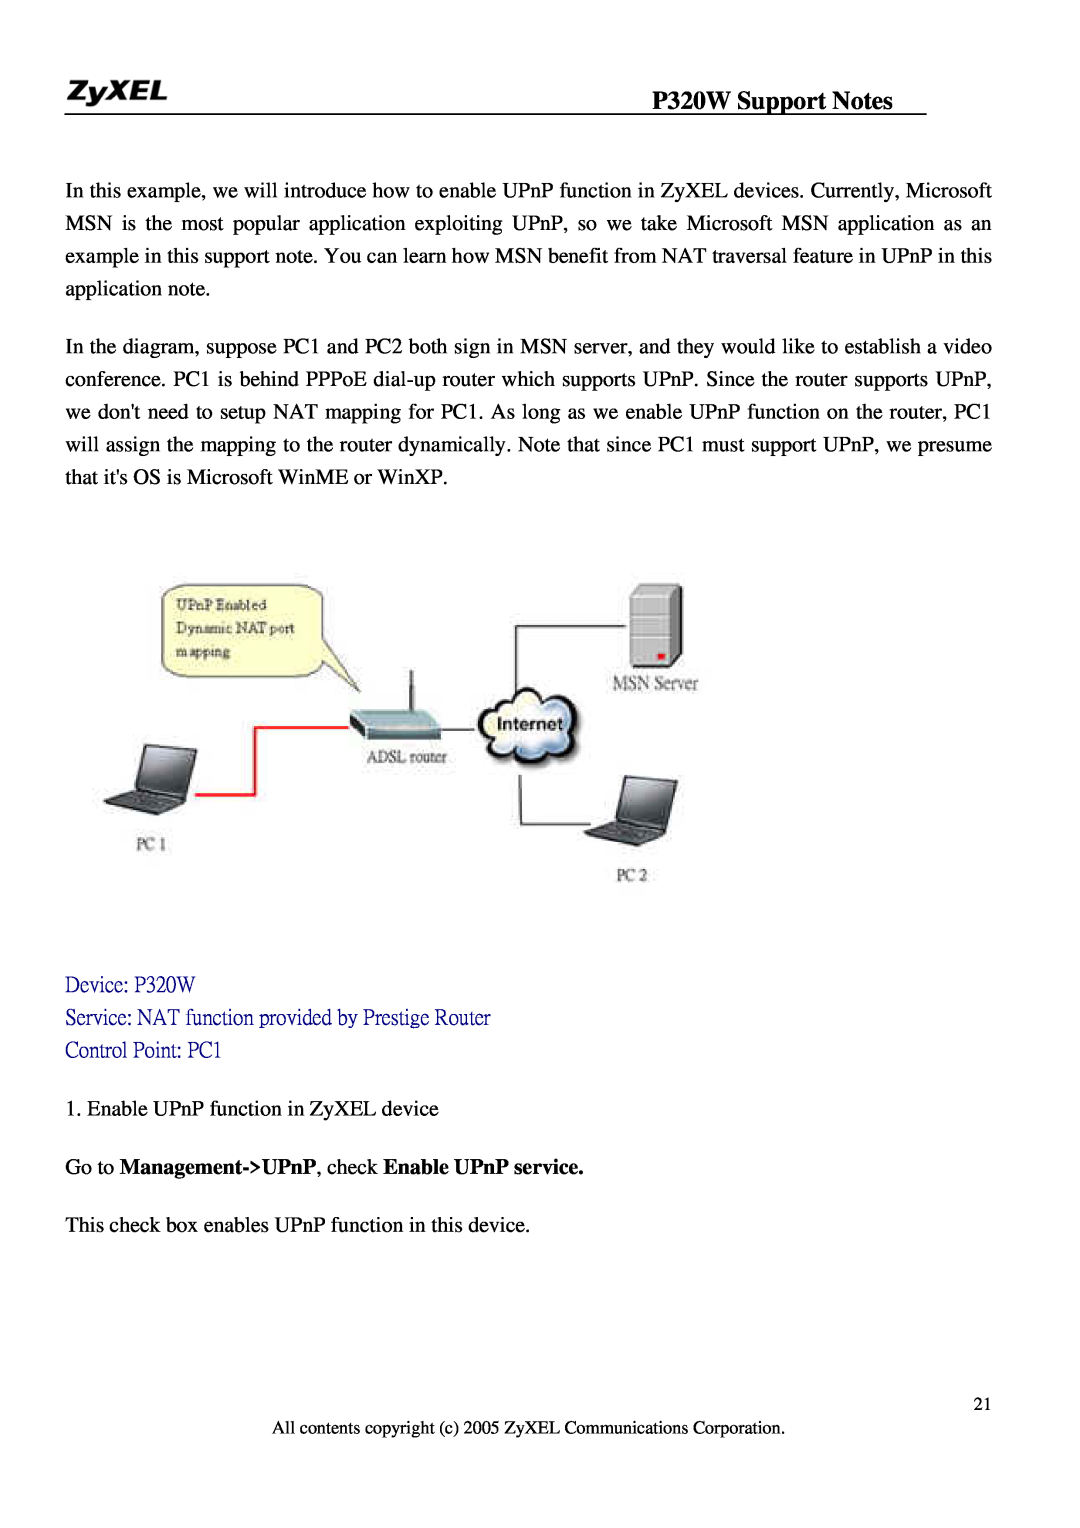 ZyXEL Communications manual Go to Management-UPnP, check Enable UPnP service, P320W Support Notes, Control Point PC1 